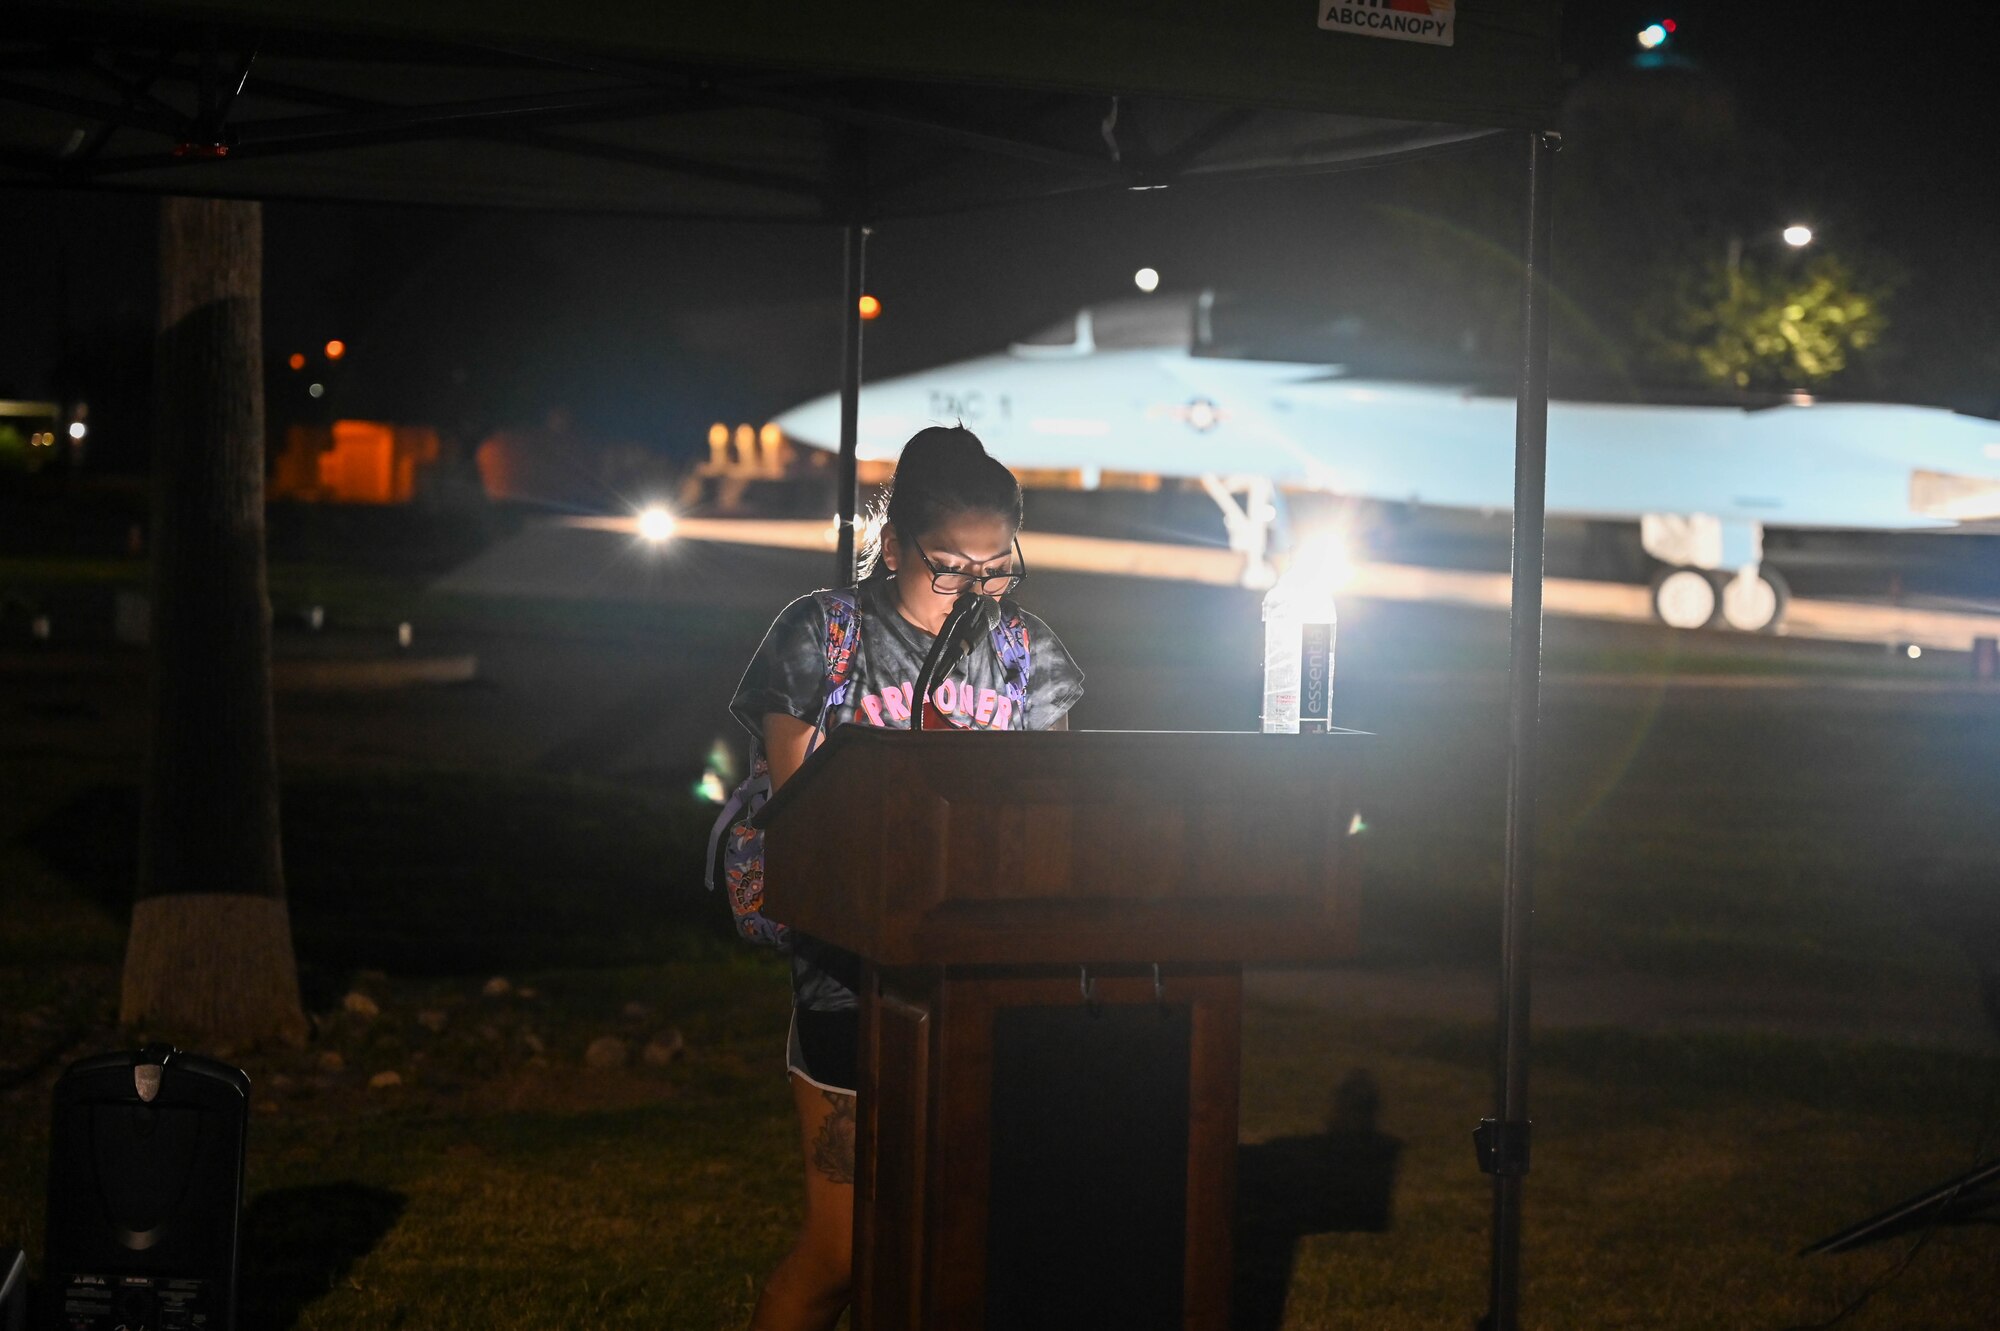 A U.S. Air Force Airman from the 56th Fighter Wing reads out the names of missing service members during a POW/MIA vigil, Sept. 15, 2022, at Luke Air Force Base, Arizona.